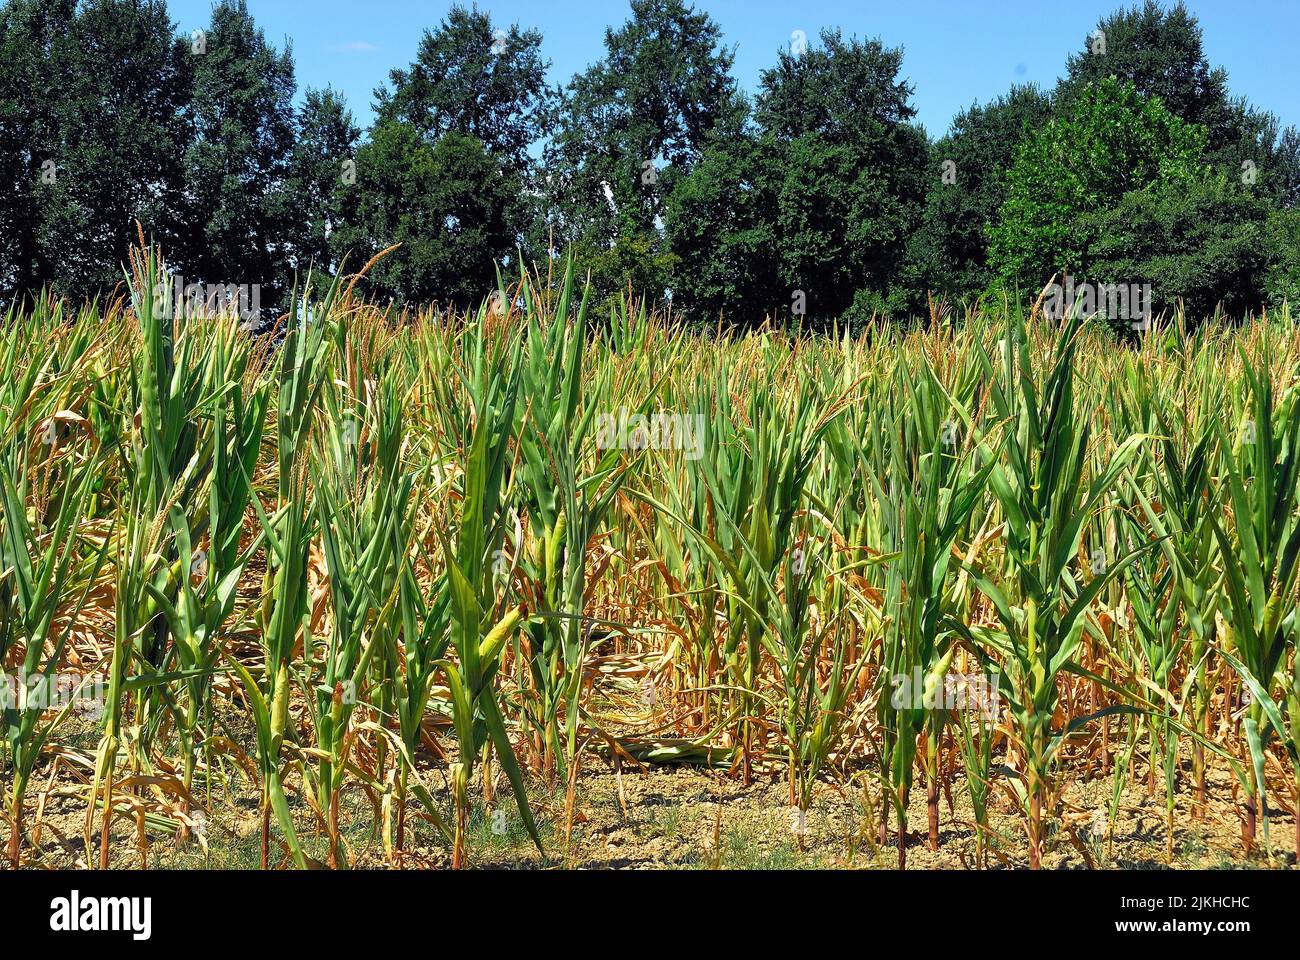 Veneto countryside, The drought affecting Northern Italy shows no sign of abating. After 200 days without rain and a winter without snow, the level of the rivers is at an all-time low. Serious damage to agriculture, two thirds of the maize crop was lost. Stock Photo